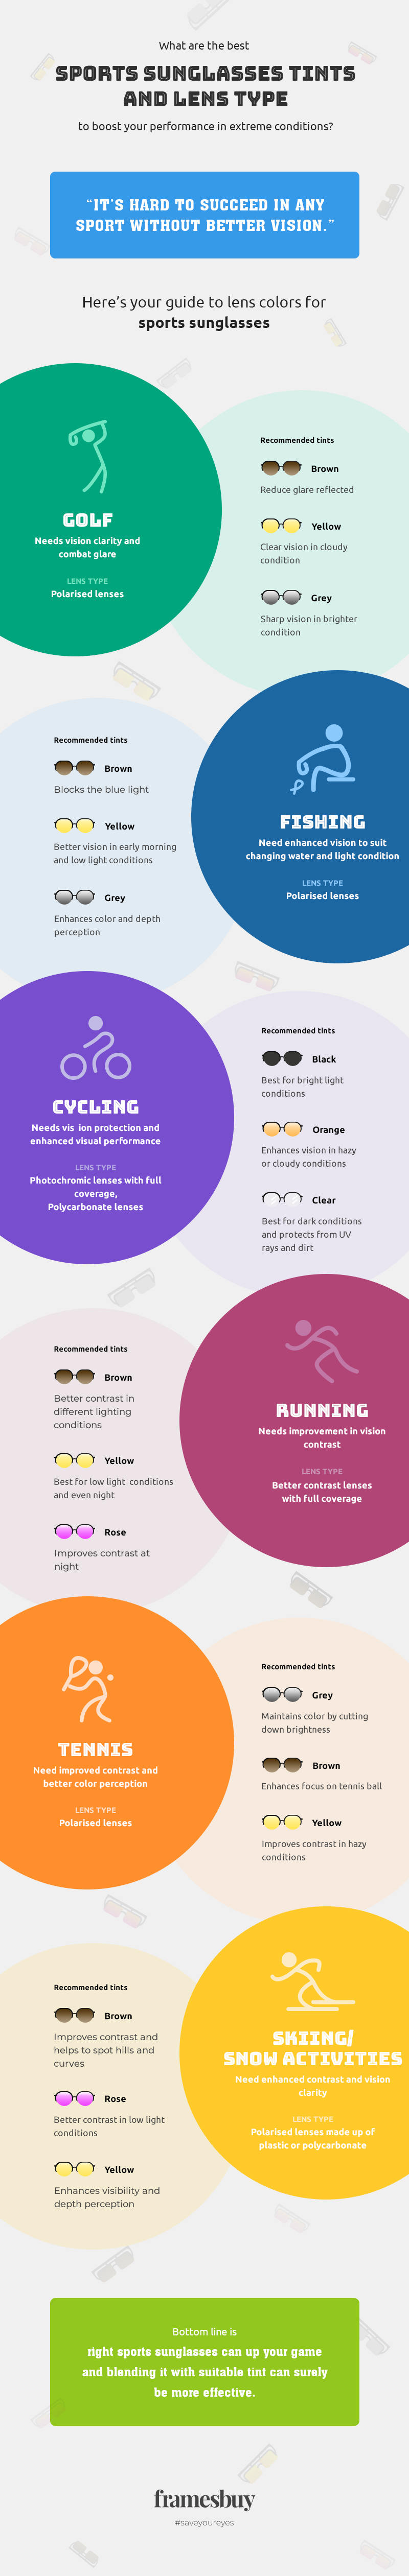 Sports sunglasses tints and lens types